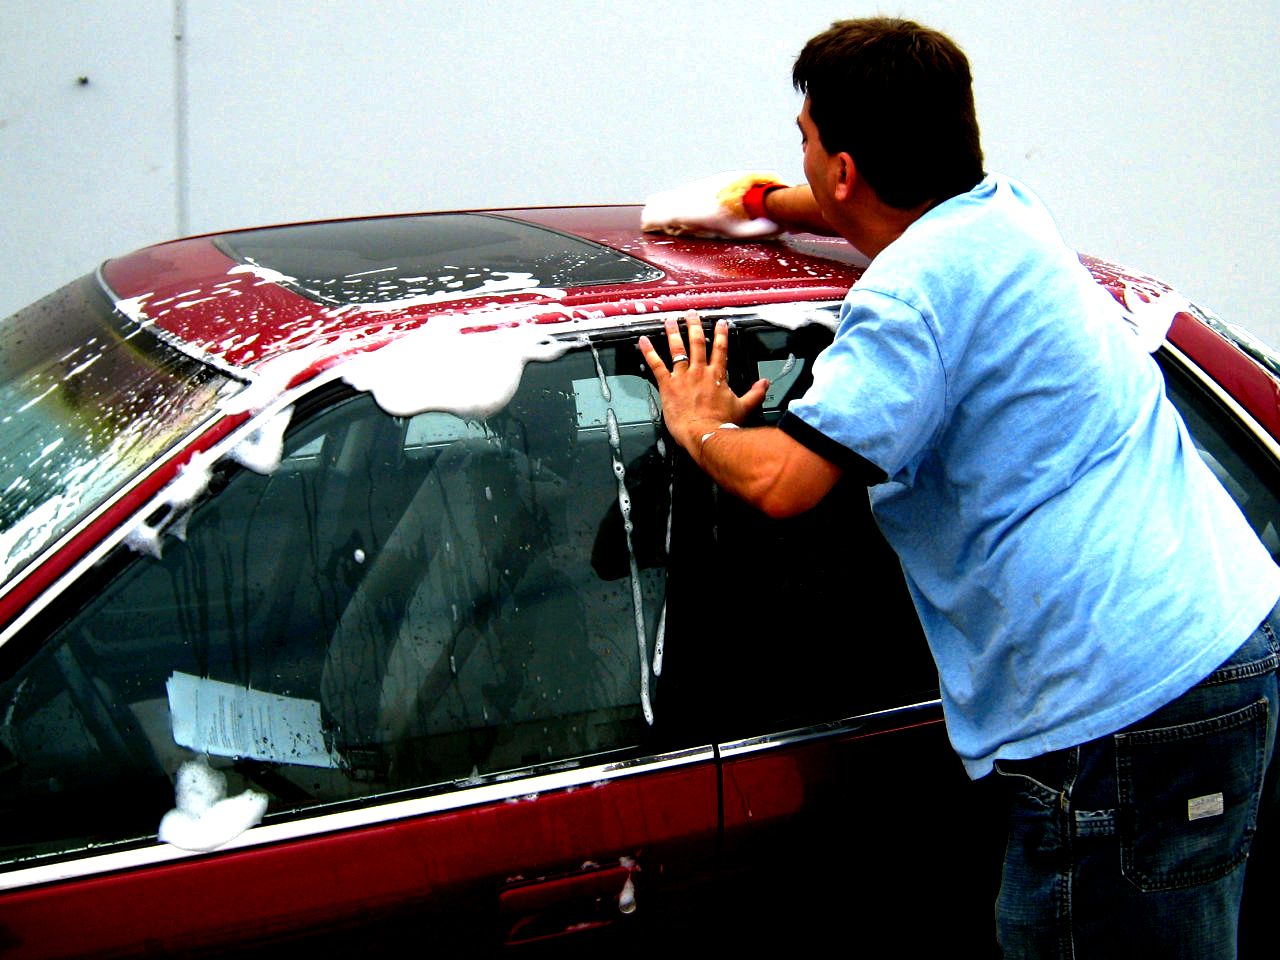 How you can wax a vehicle correctly [stepbystep guide] lukewarm water in the